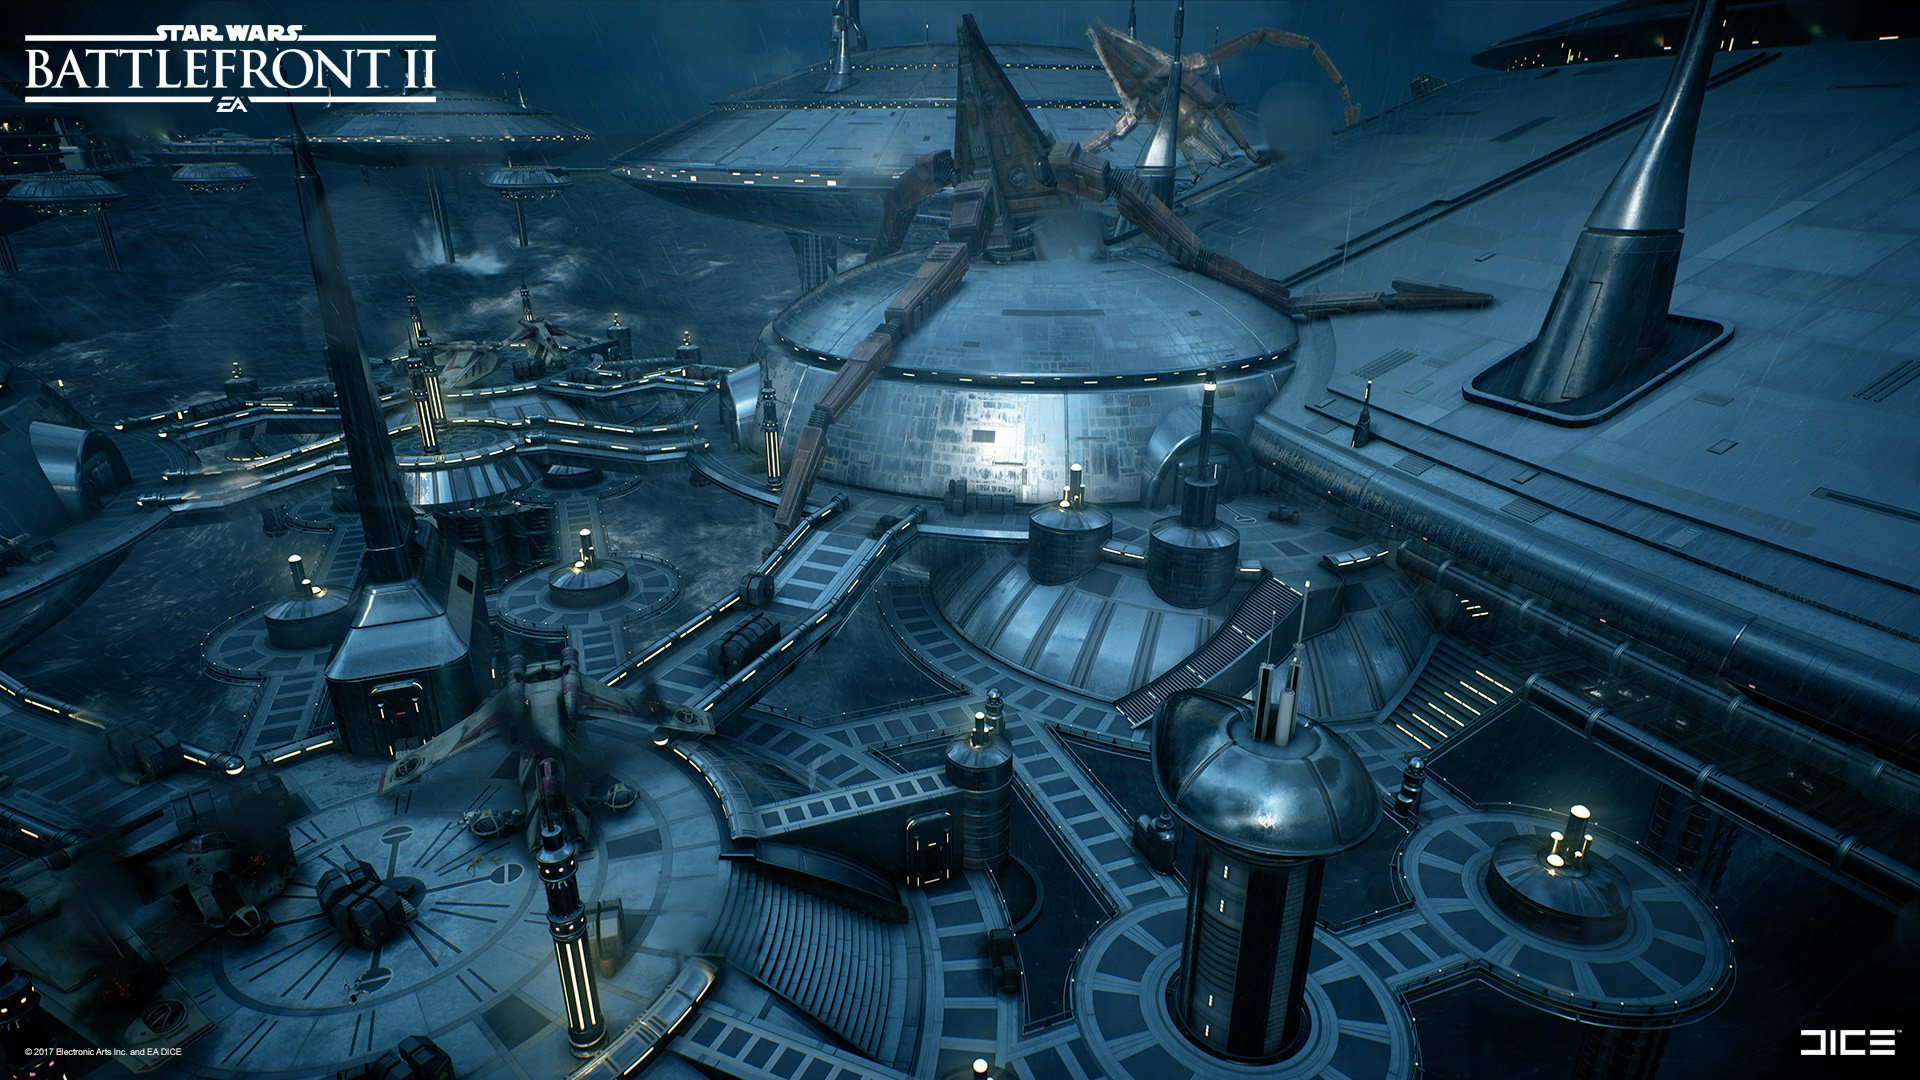 HD wallpaper of Kamino from Star Wars Battlefront II, featuring the iconic cloning facilities under a stormy sky.